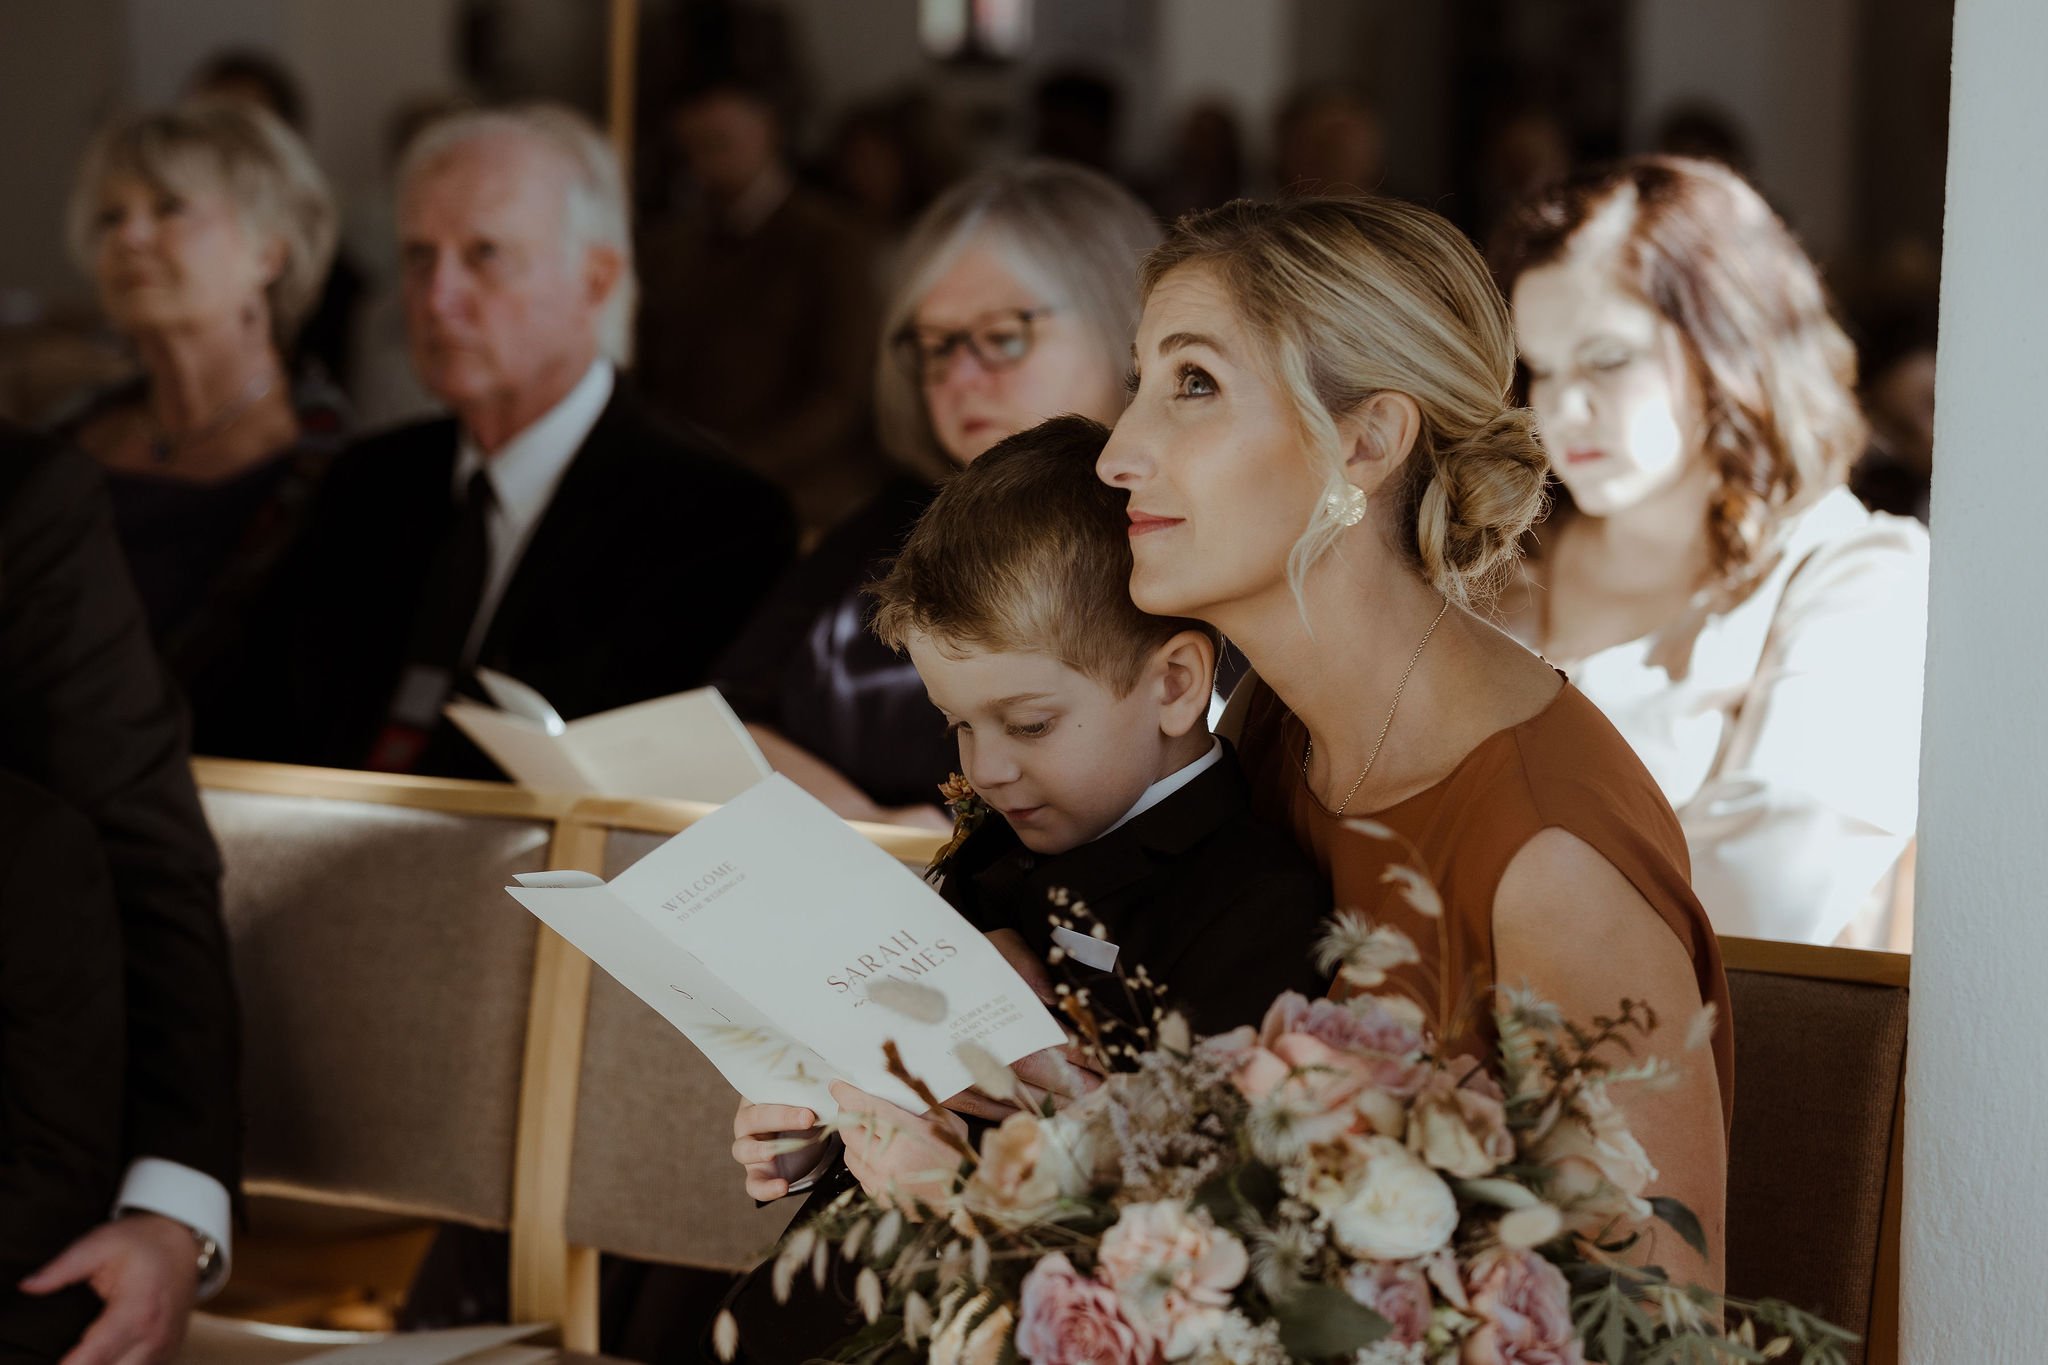 Pageboy reading wedding order of service during wedding ceremony in church